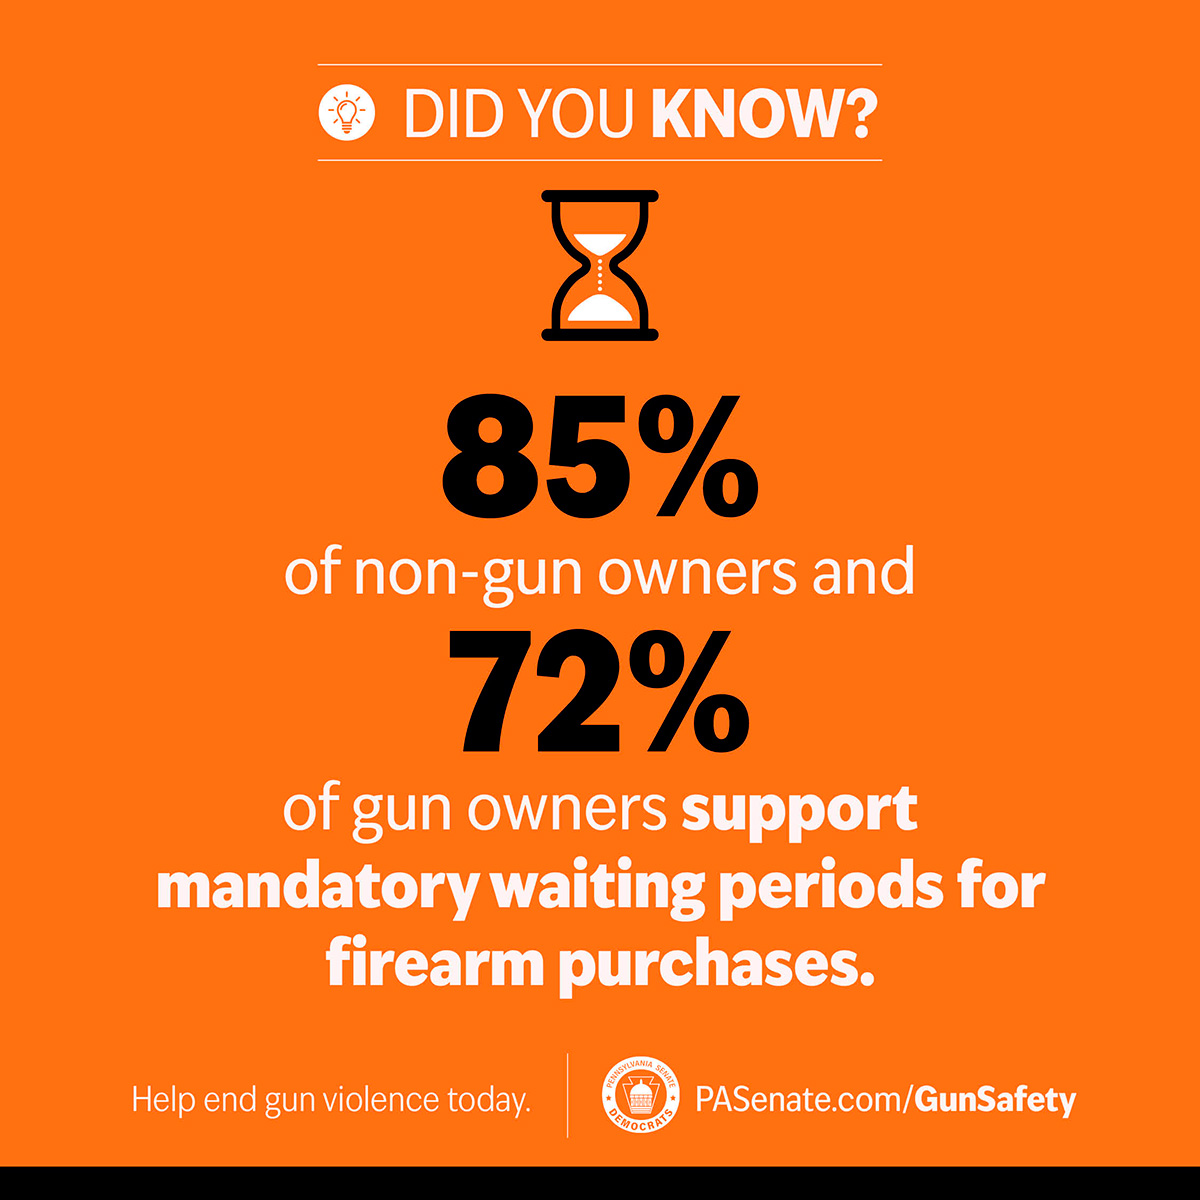 Did you know? 85% of non-gun owners & 72% of gun owners.